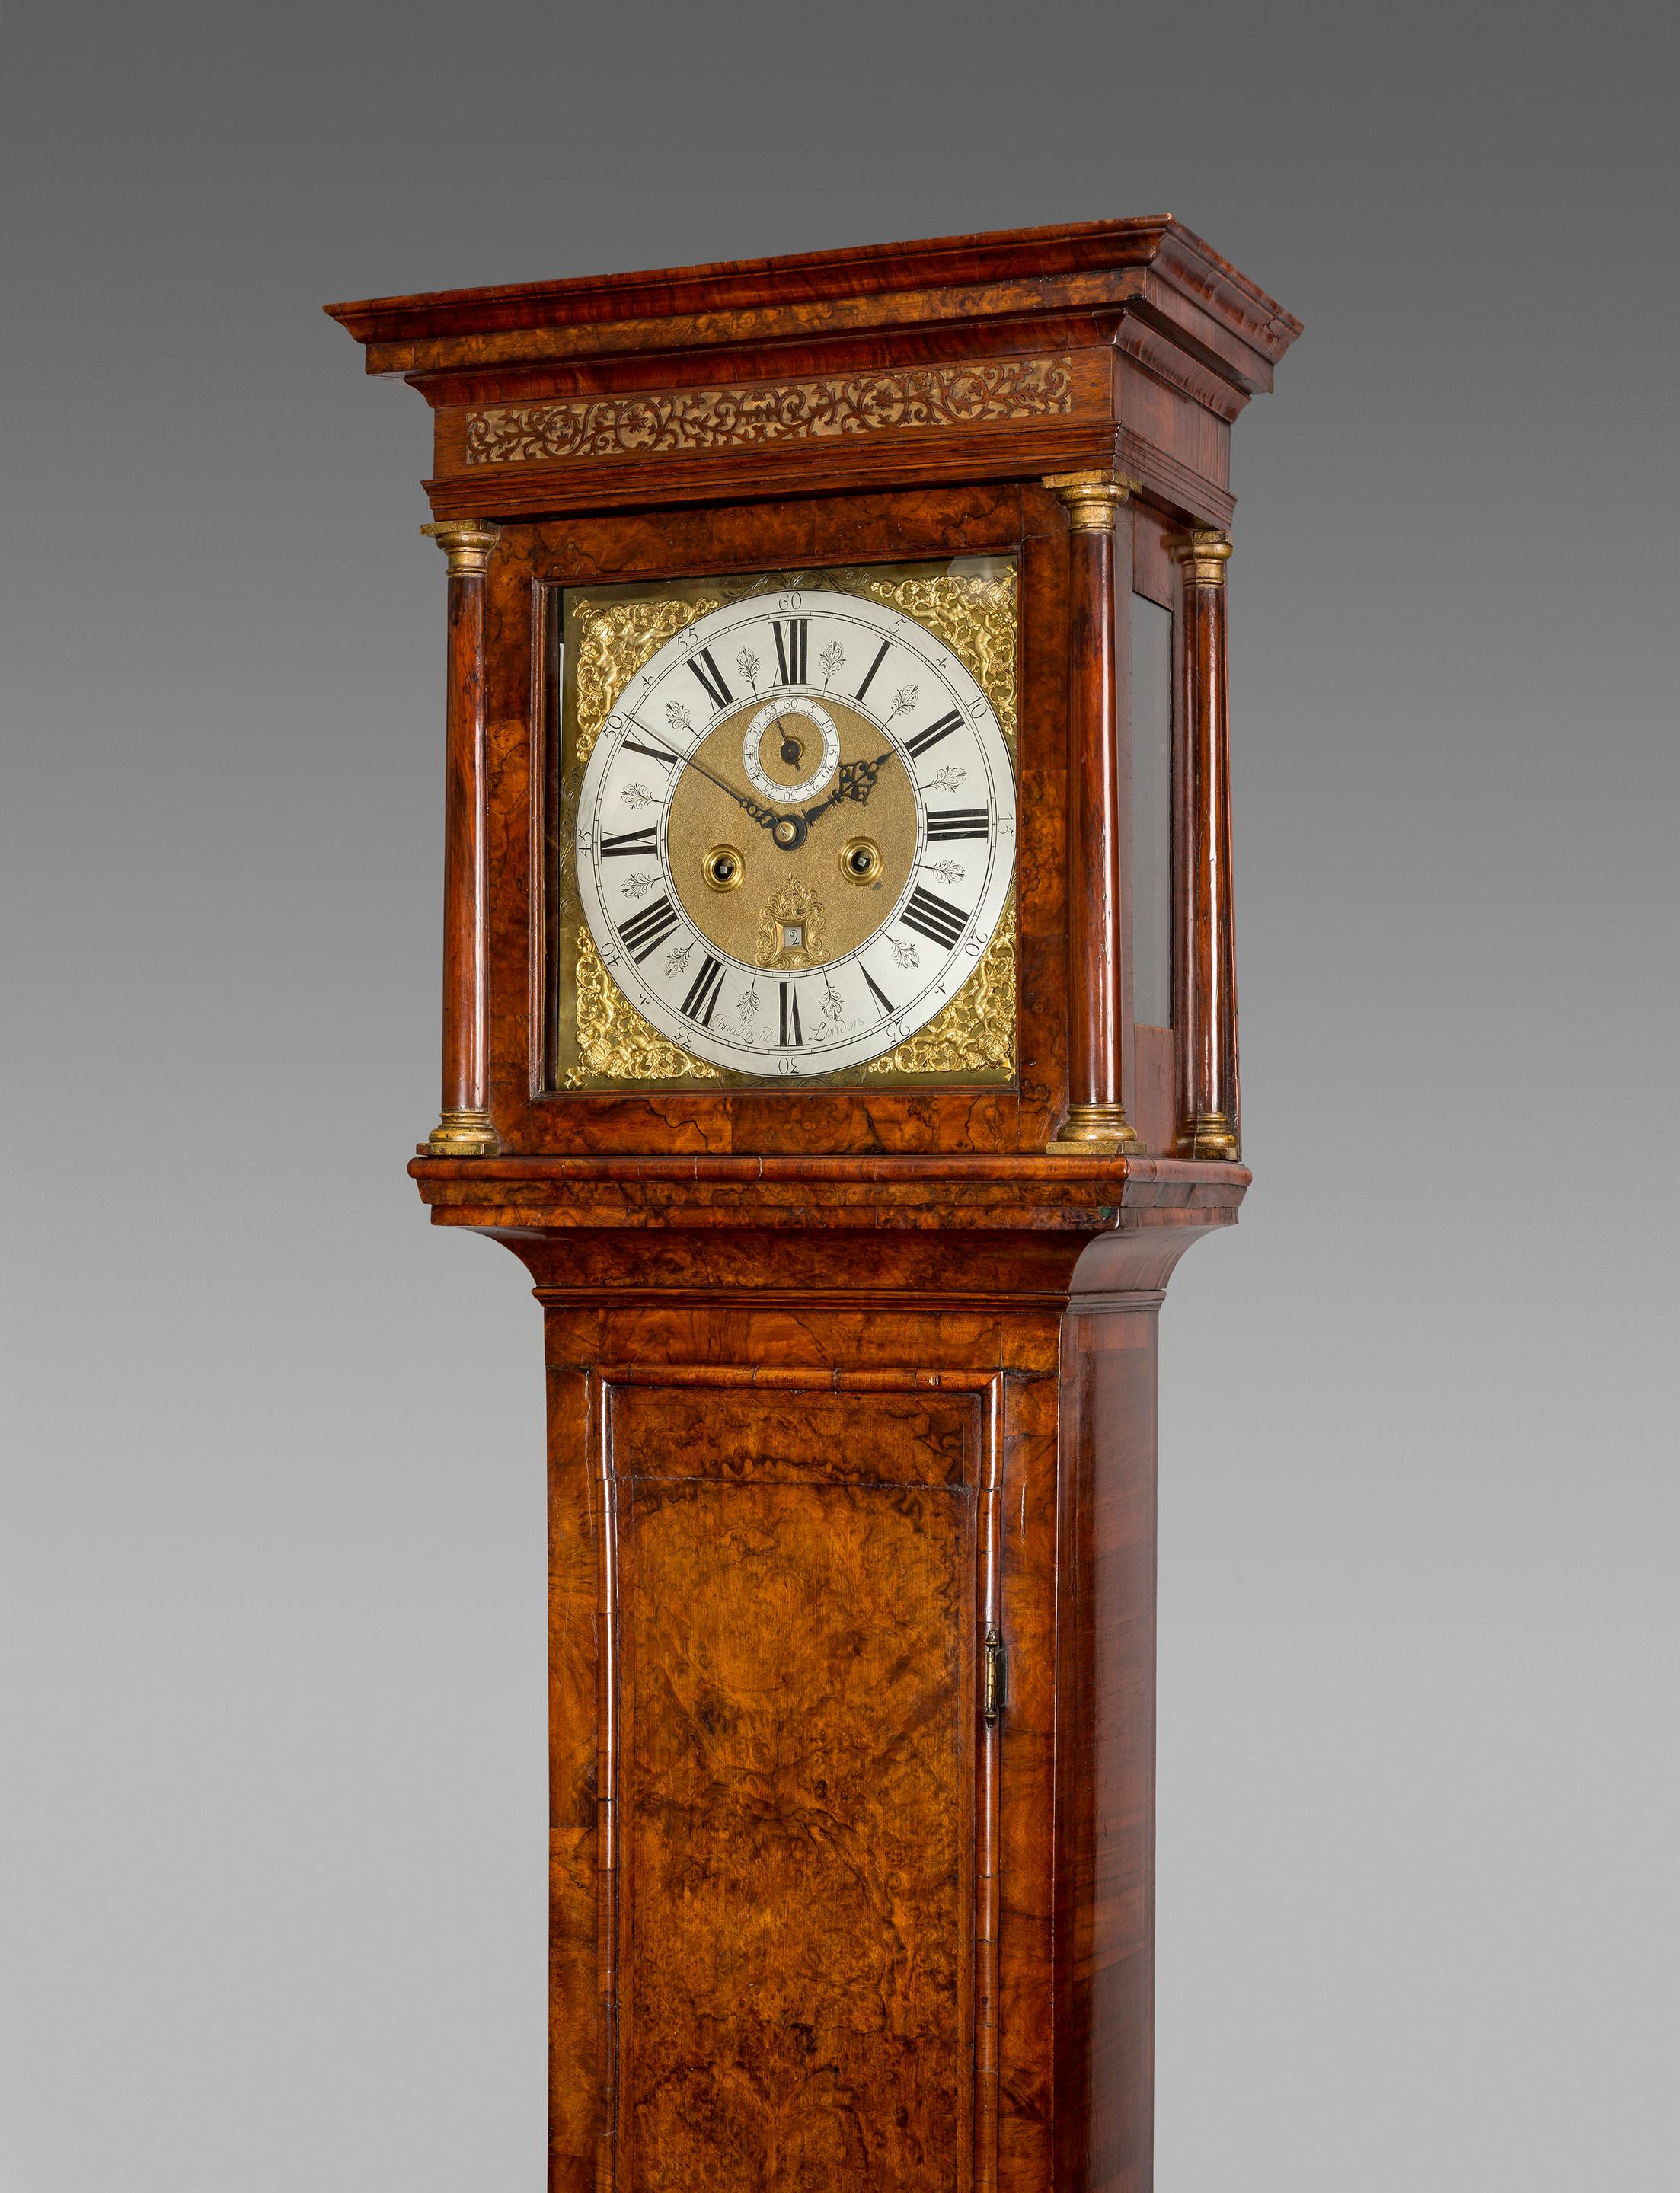 A fine Queen Anne period, early 18th century walnut hour-striking longcase clock by this well-known London clockmaker.

The molded case is veneered with beautifully figured walnut, the herringbone cross-banded rectangular trunk door has raised